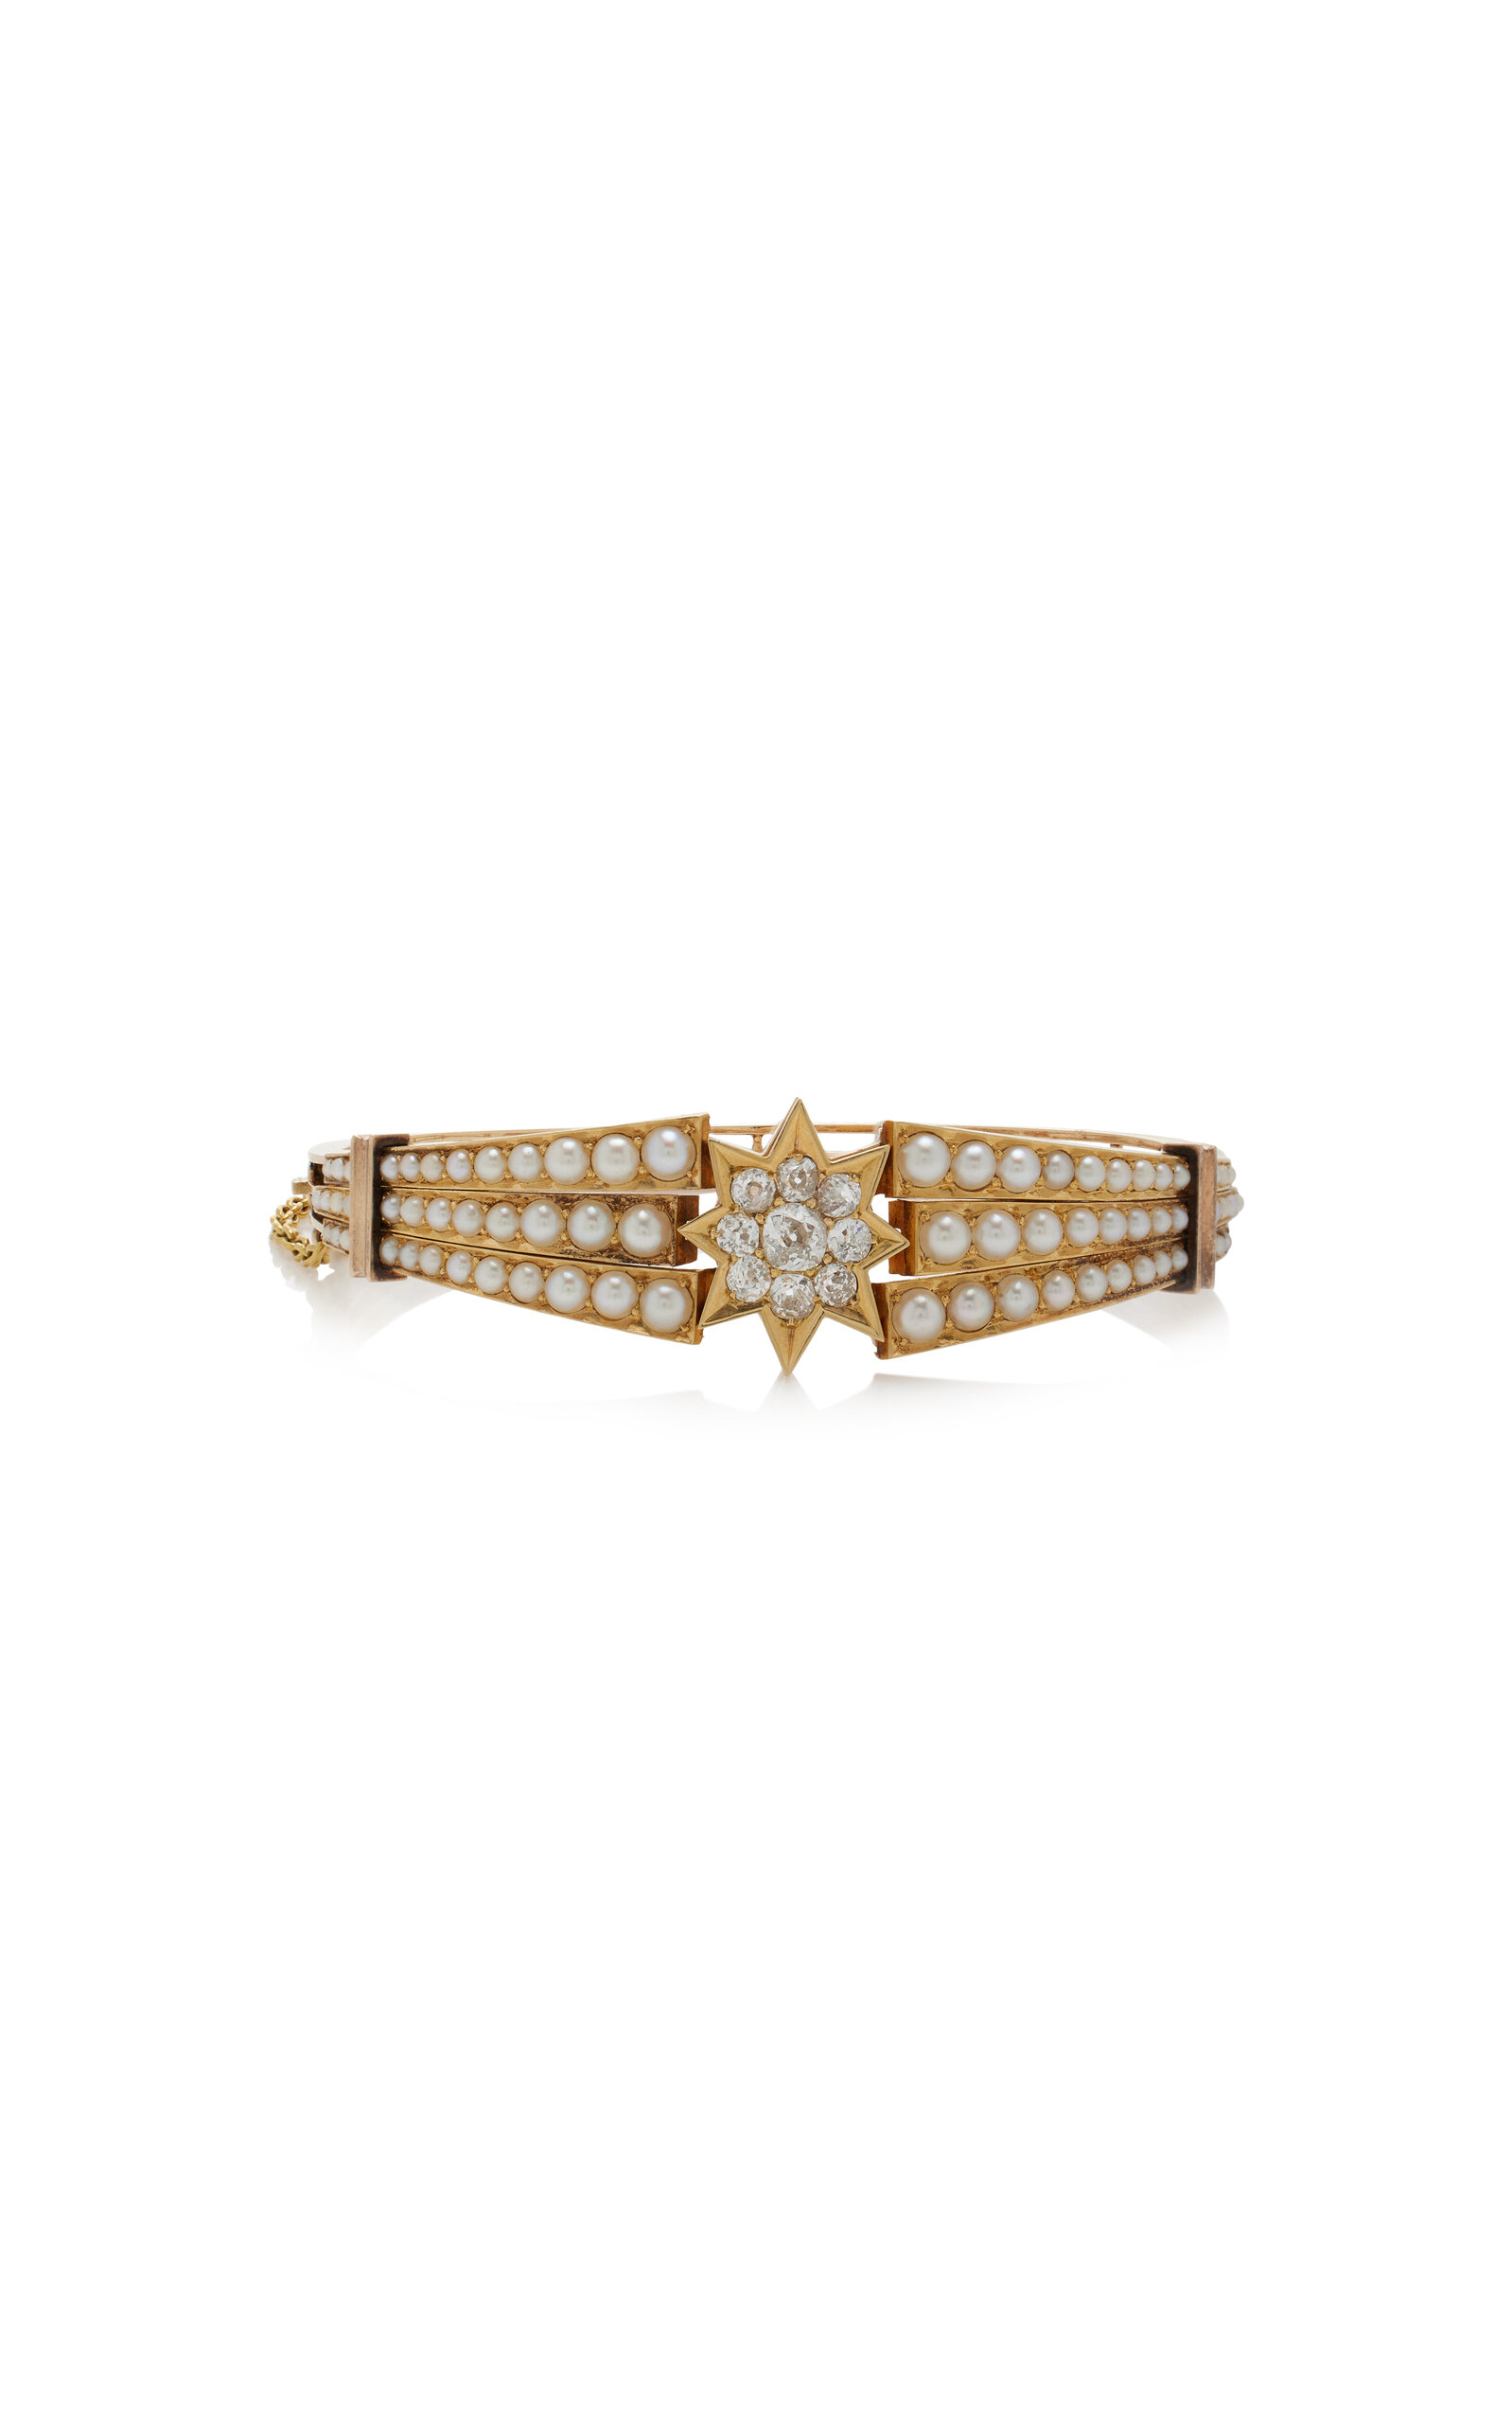 One-of-a-Kind Victorian 15K Yellow Gold Pearl; Diamond Bangle Bracelet